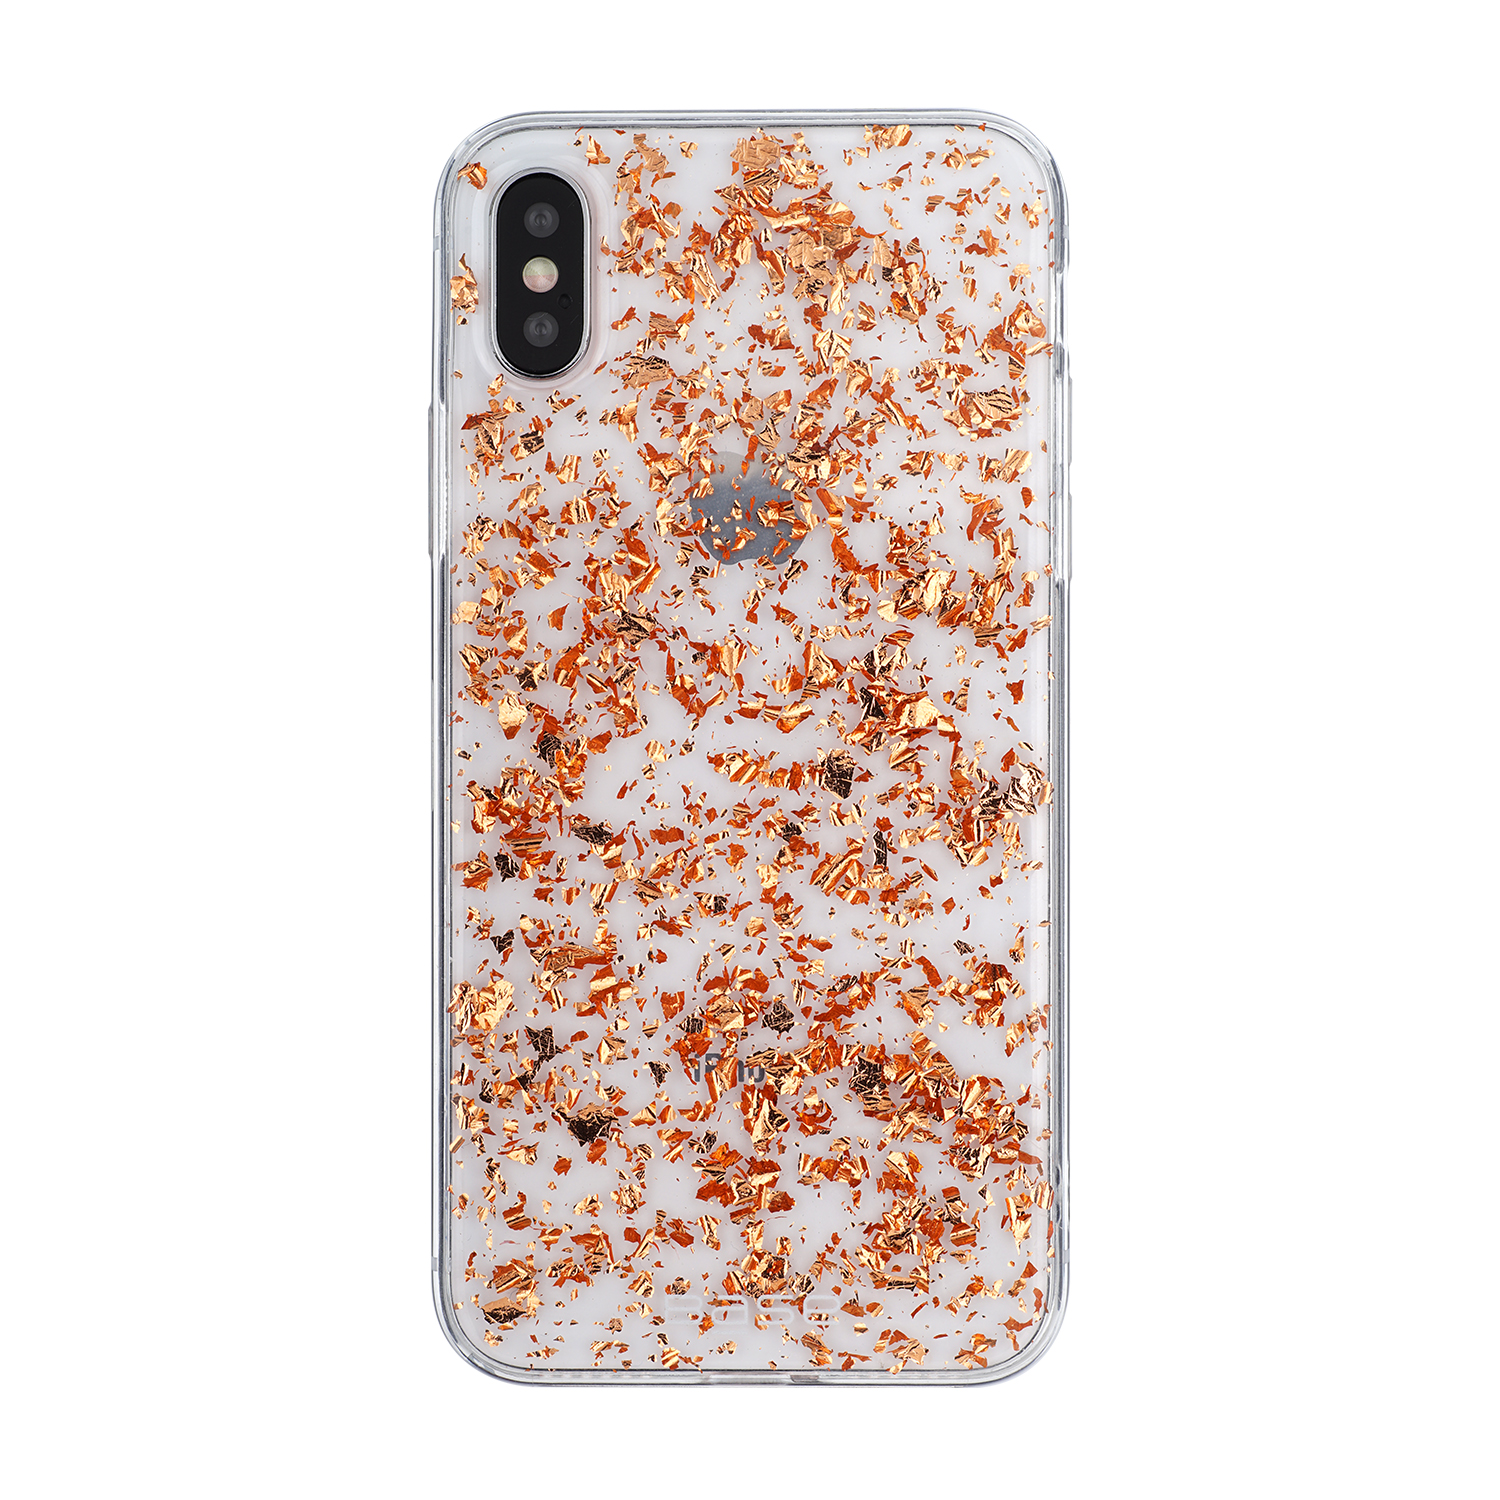 Base CharismaGlimmer - Glimmering Protective Case for iPhone X - Rose Gold